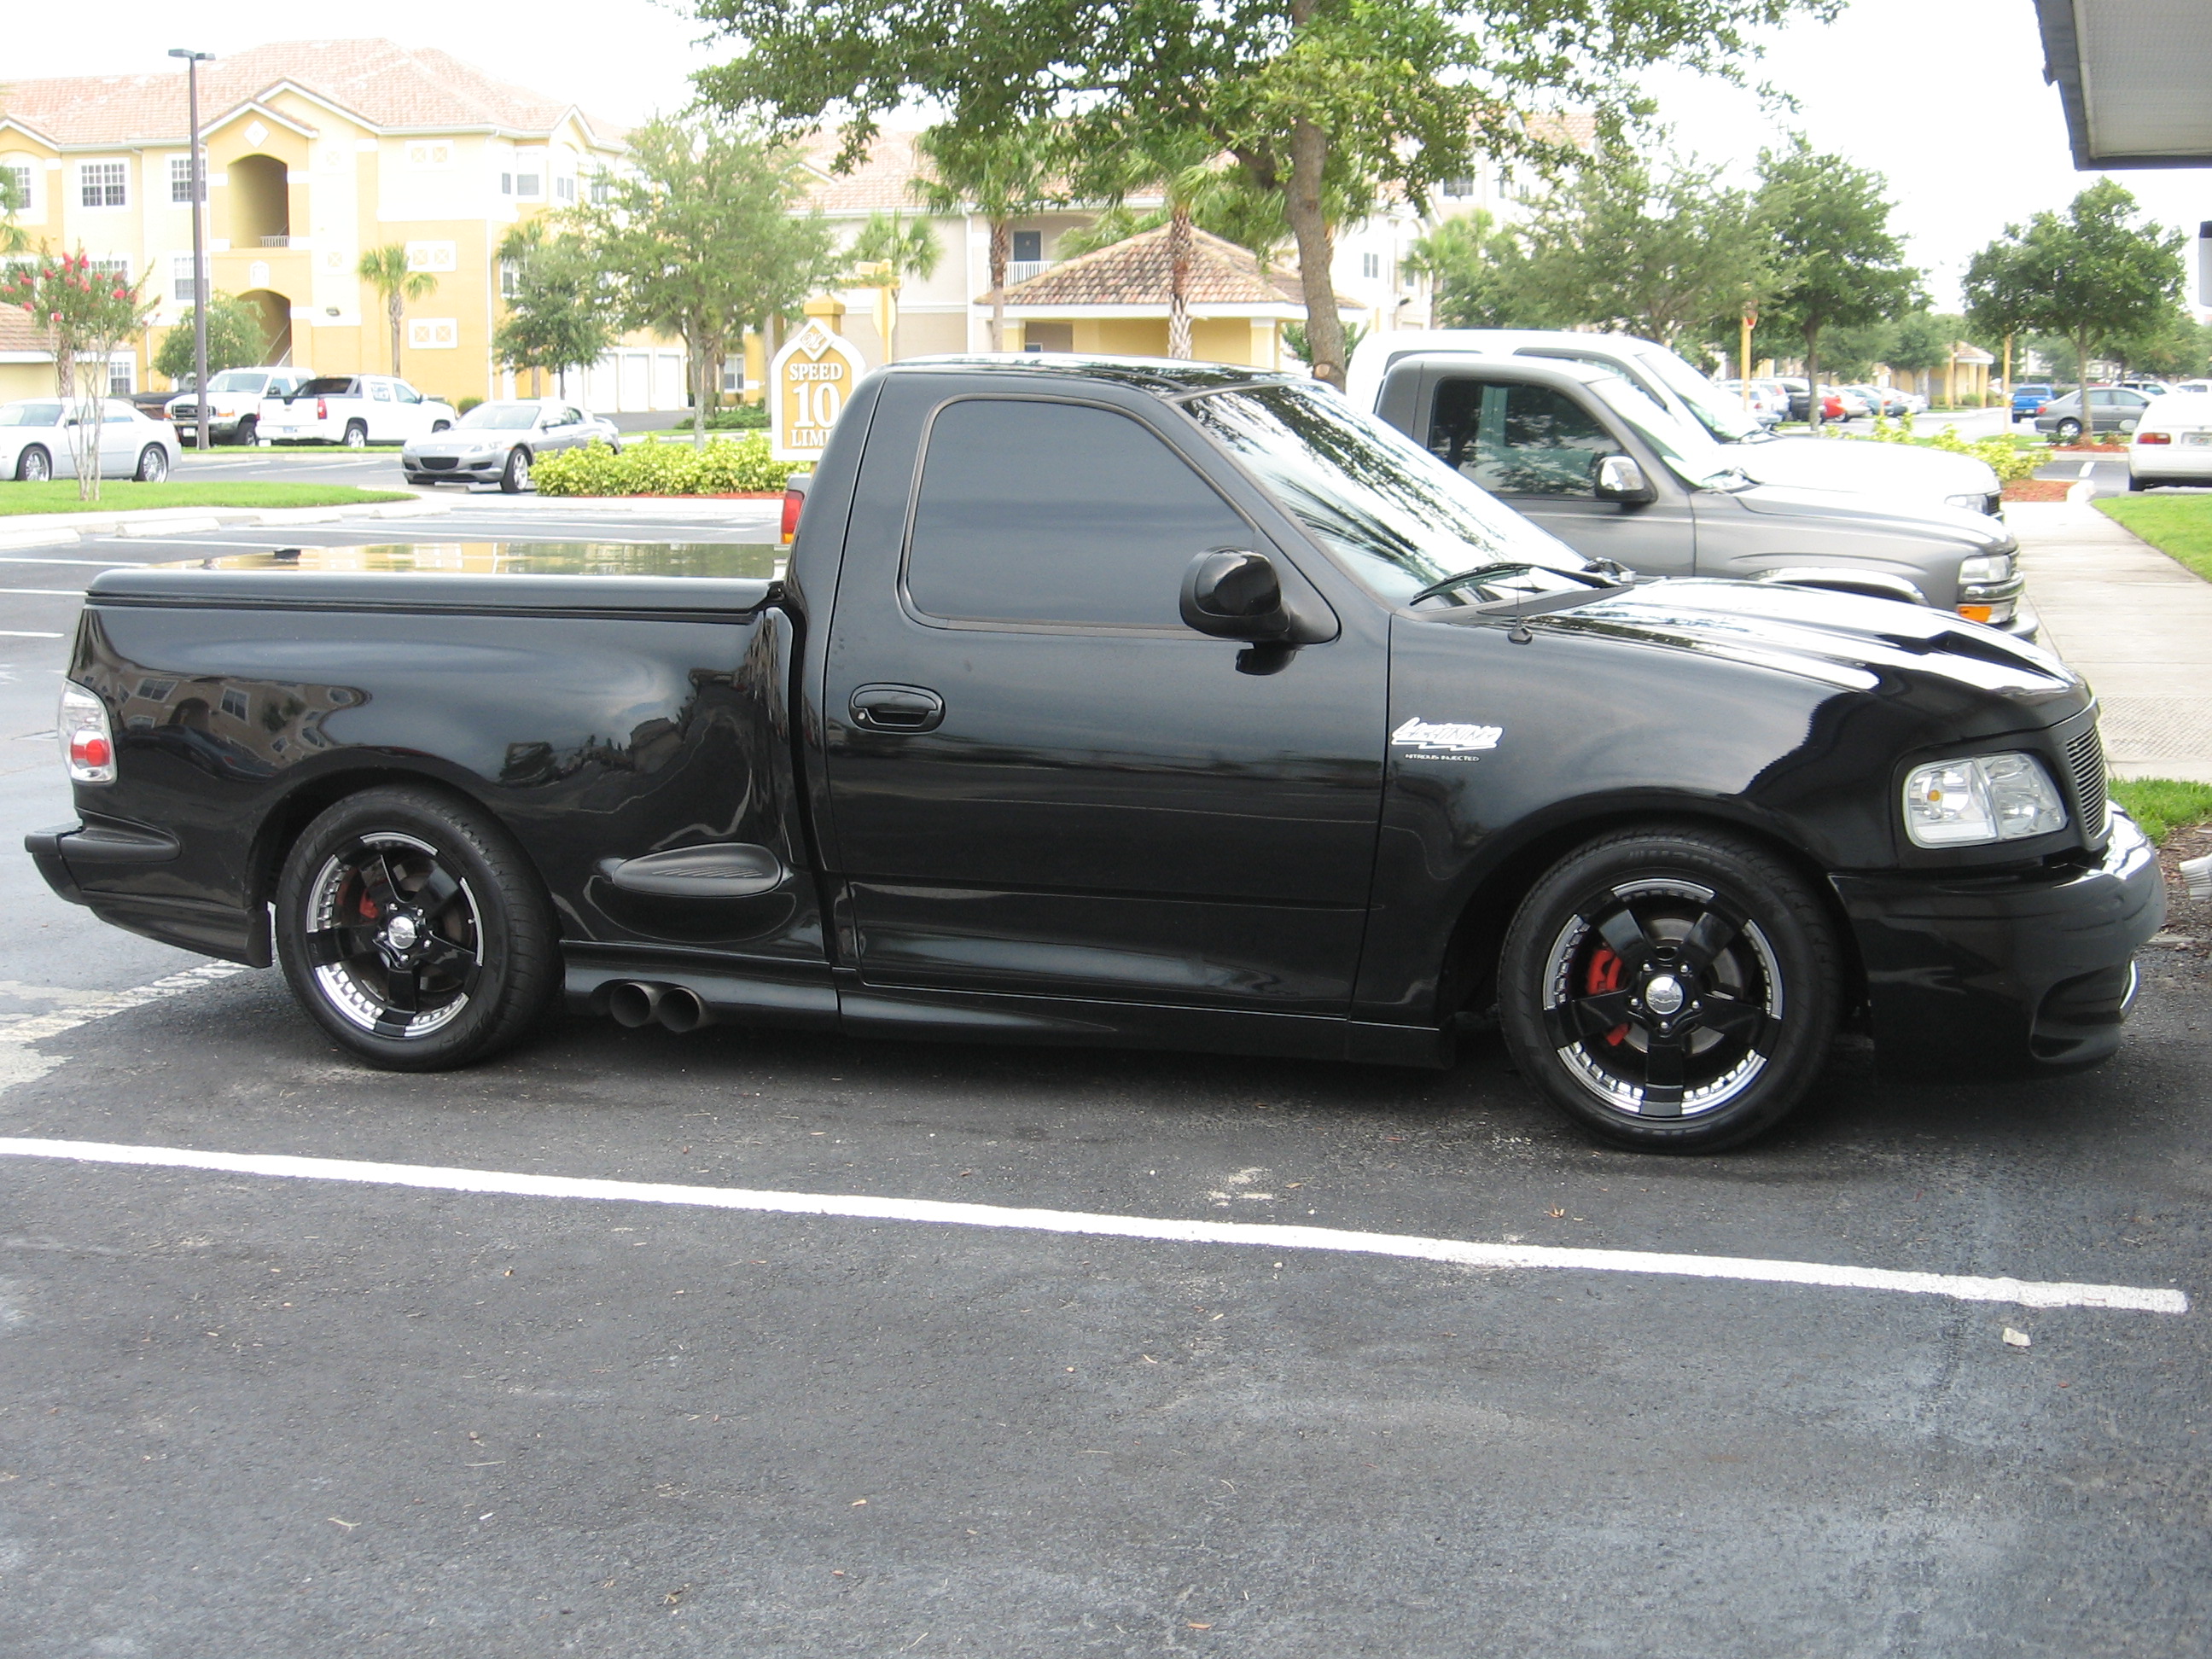 Ford lightning pictures and quarter mile time #5